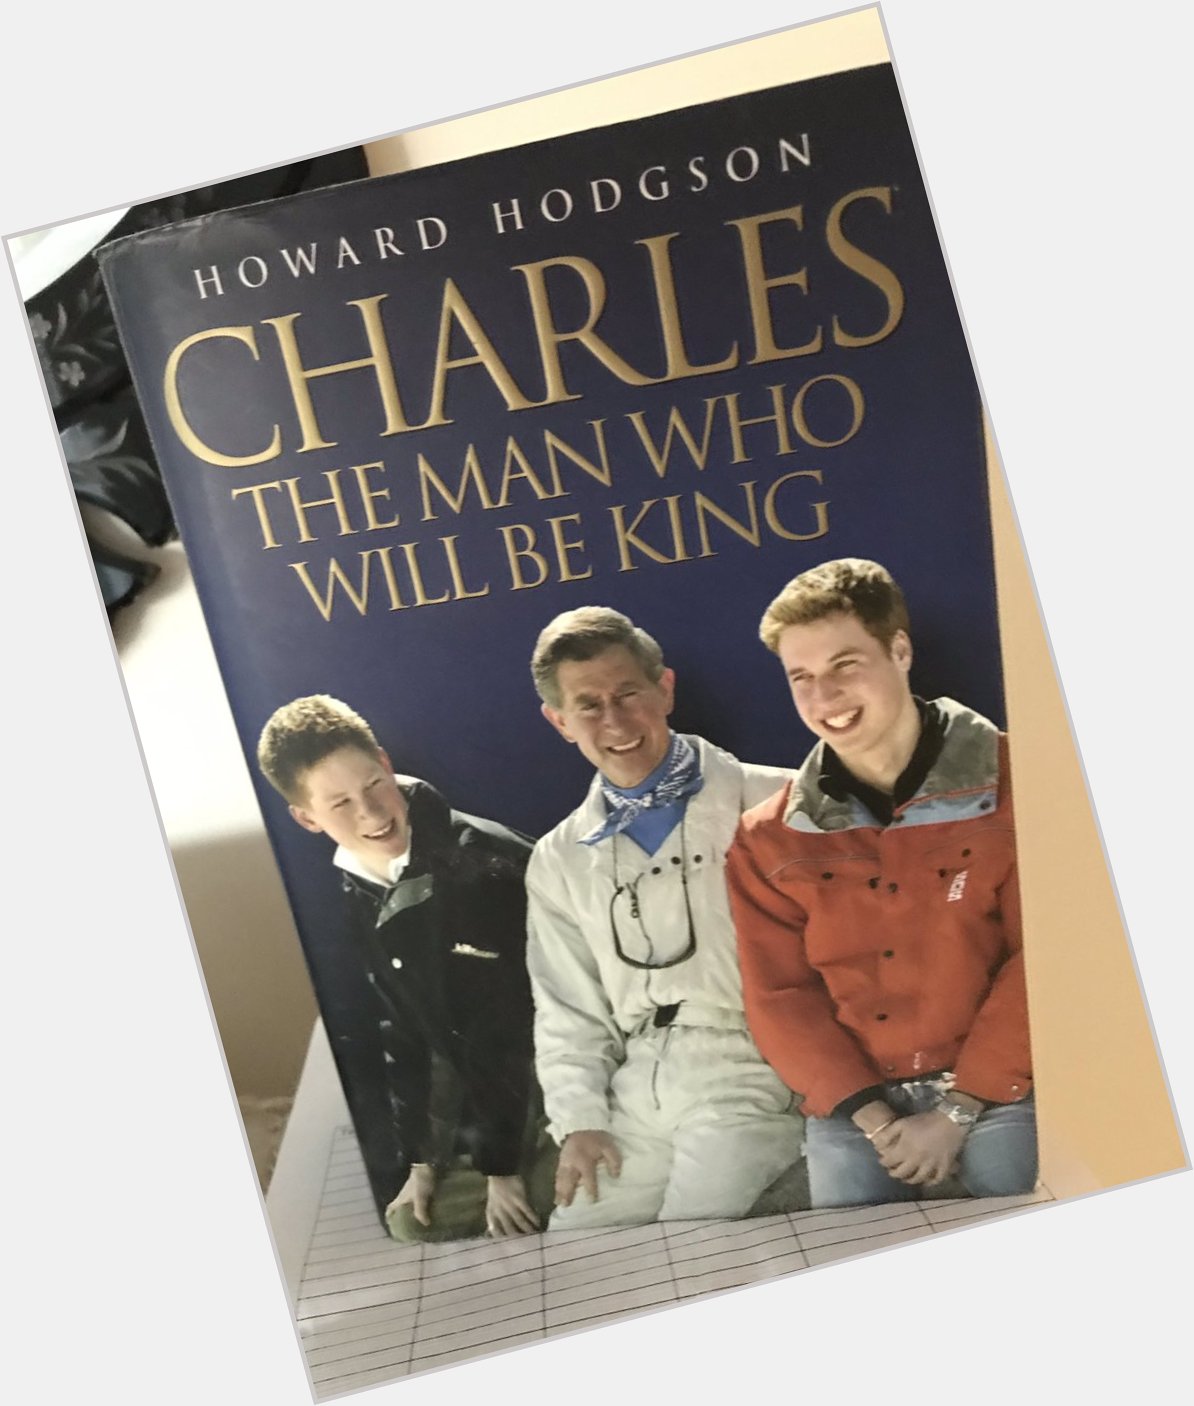 Happy 70th Birthday HRH Prince Charles. My Dad was honoured to write a book about him, a few years ago. 